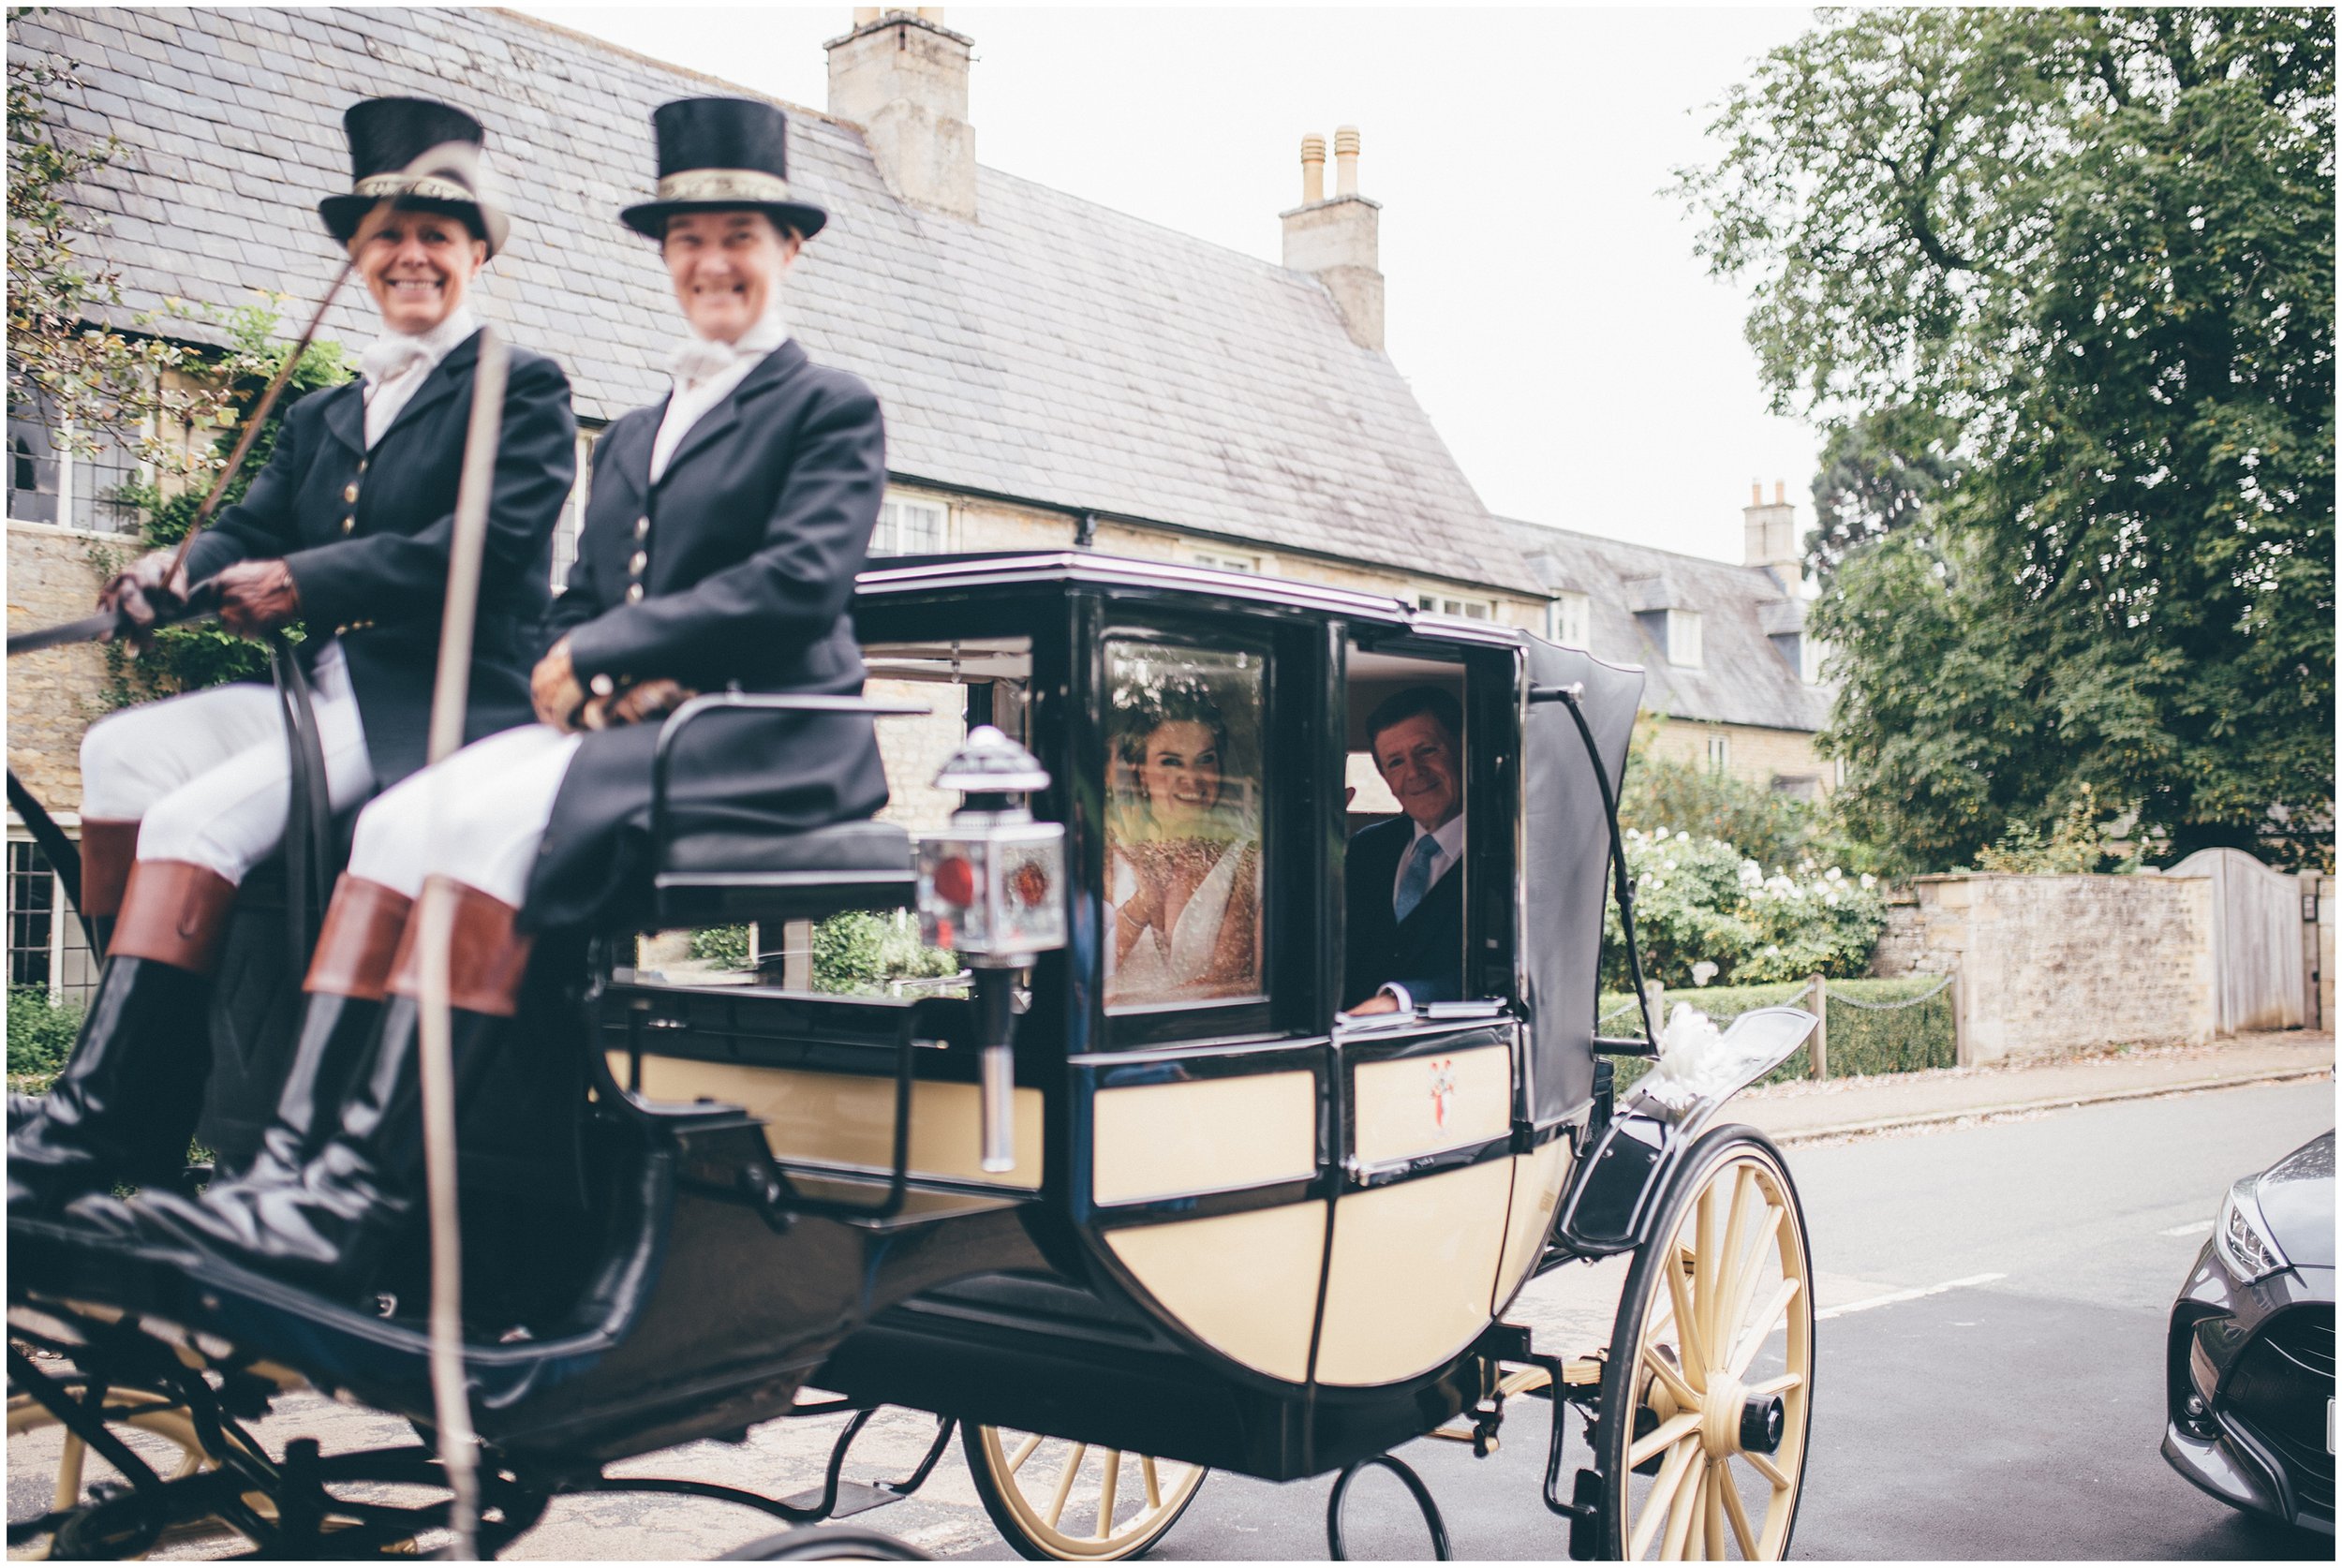 Bride arrives in horse drawn carriage.